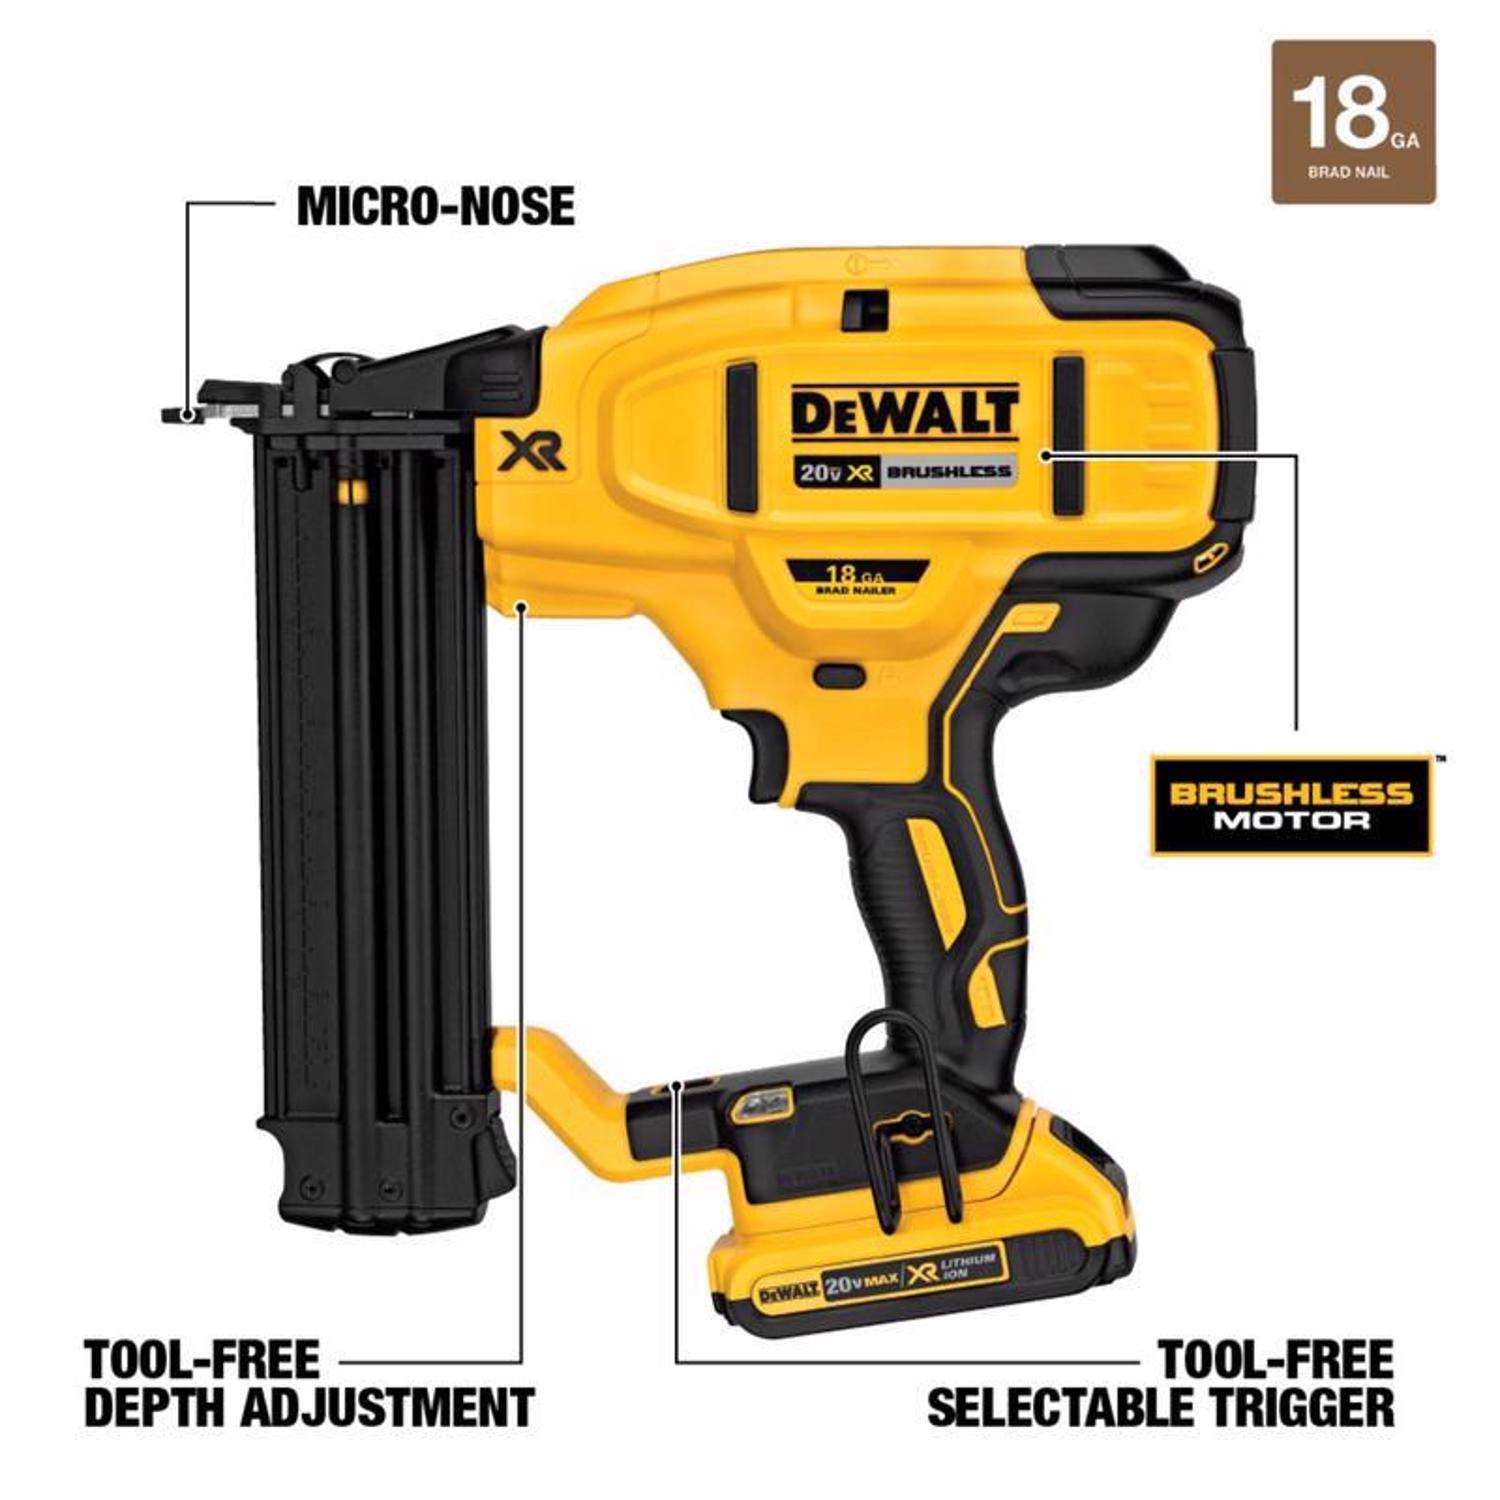 DeWalt Cordless Brad Nailer Review: Is It Worth It? - Tested by